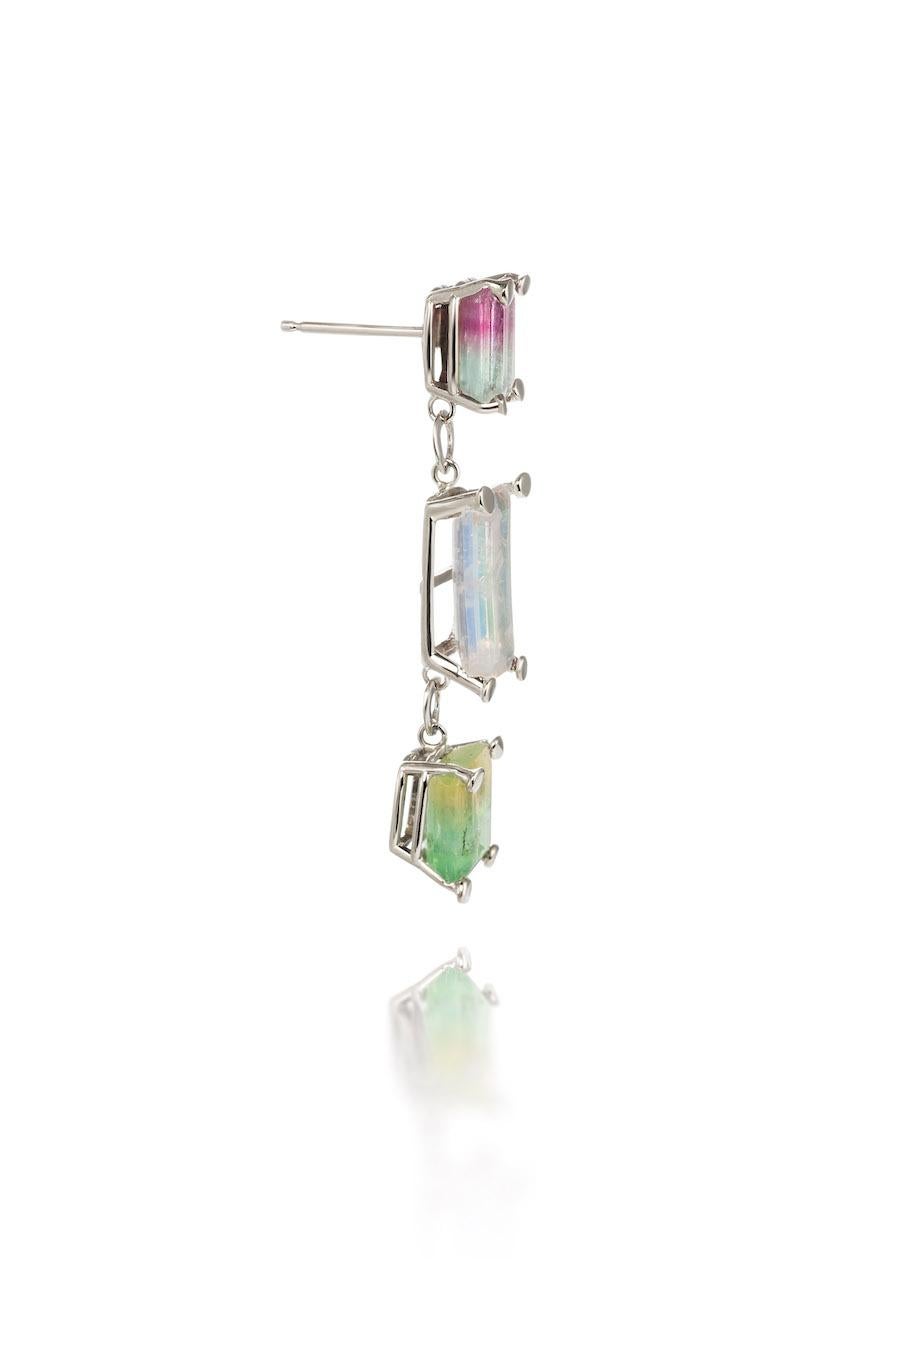 Emerald Cut 10K Candy Colored Fluorite and Moonstone Earrings For Sale